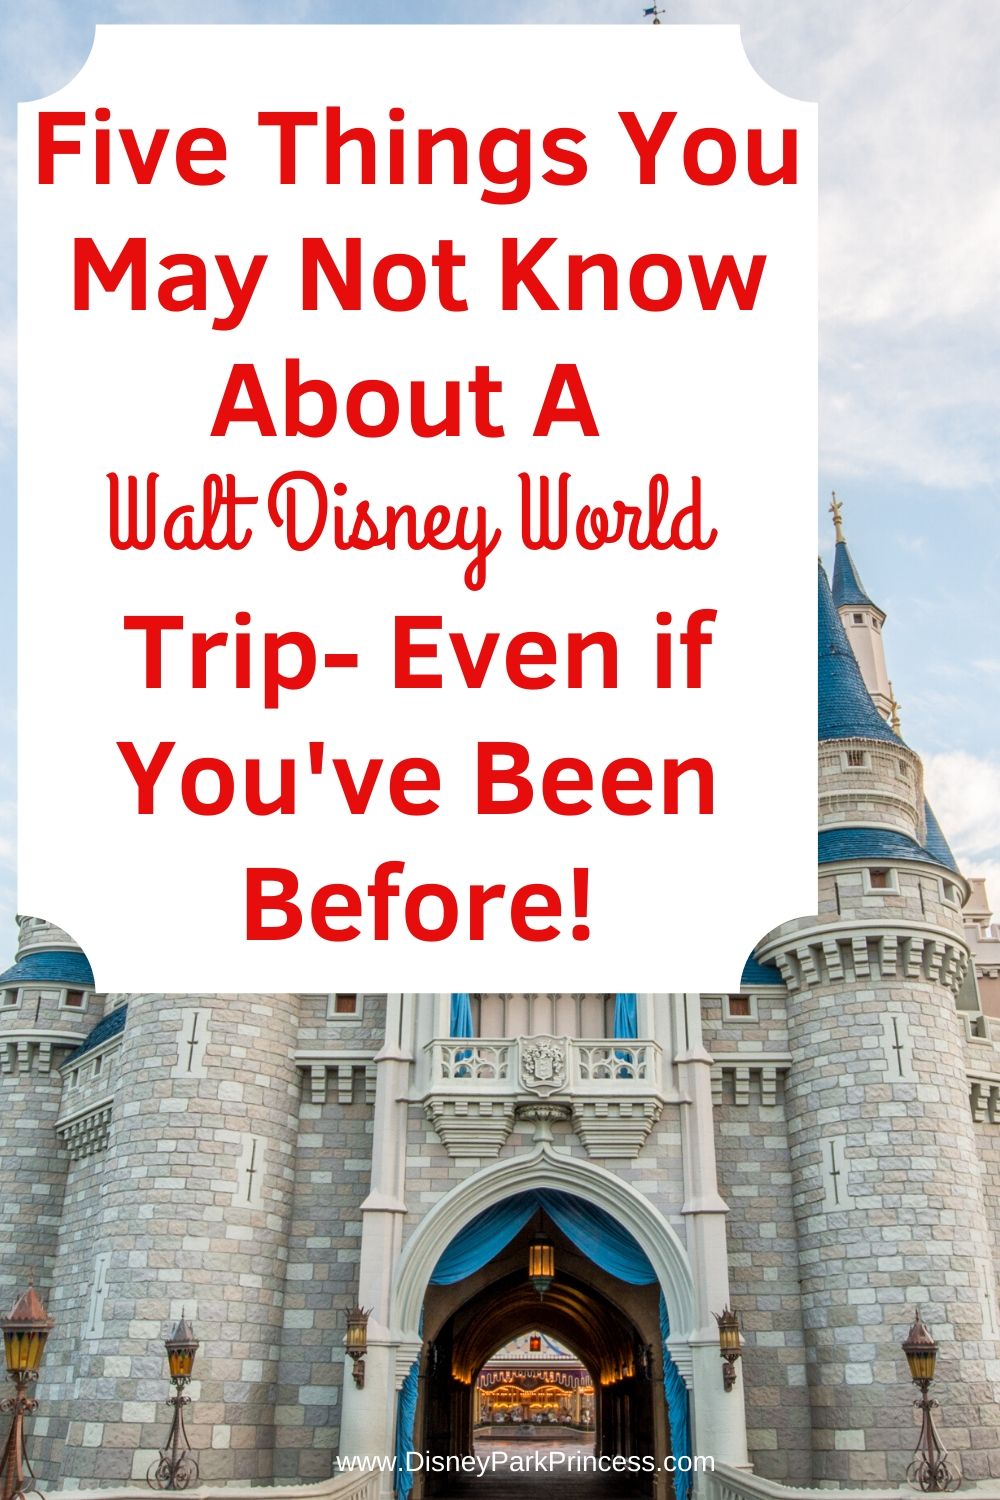 Five Things You May Not Know About A Walt Disney World Trip- Even if You've Been Before #disney #waltdisneyworld #disneytravel #vacation